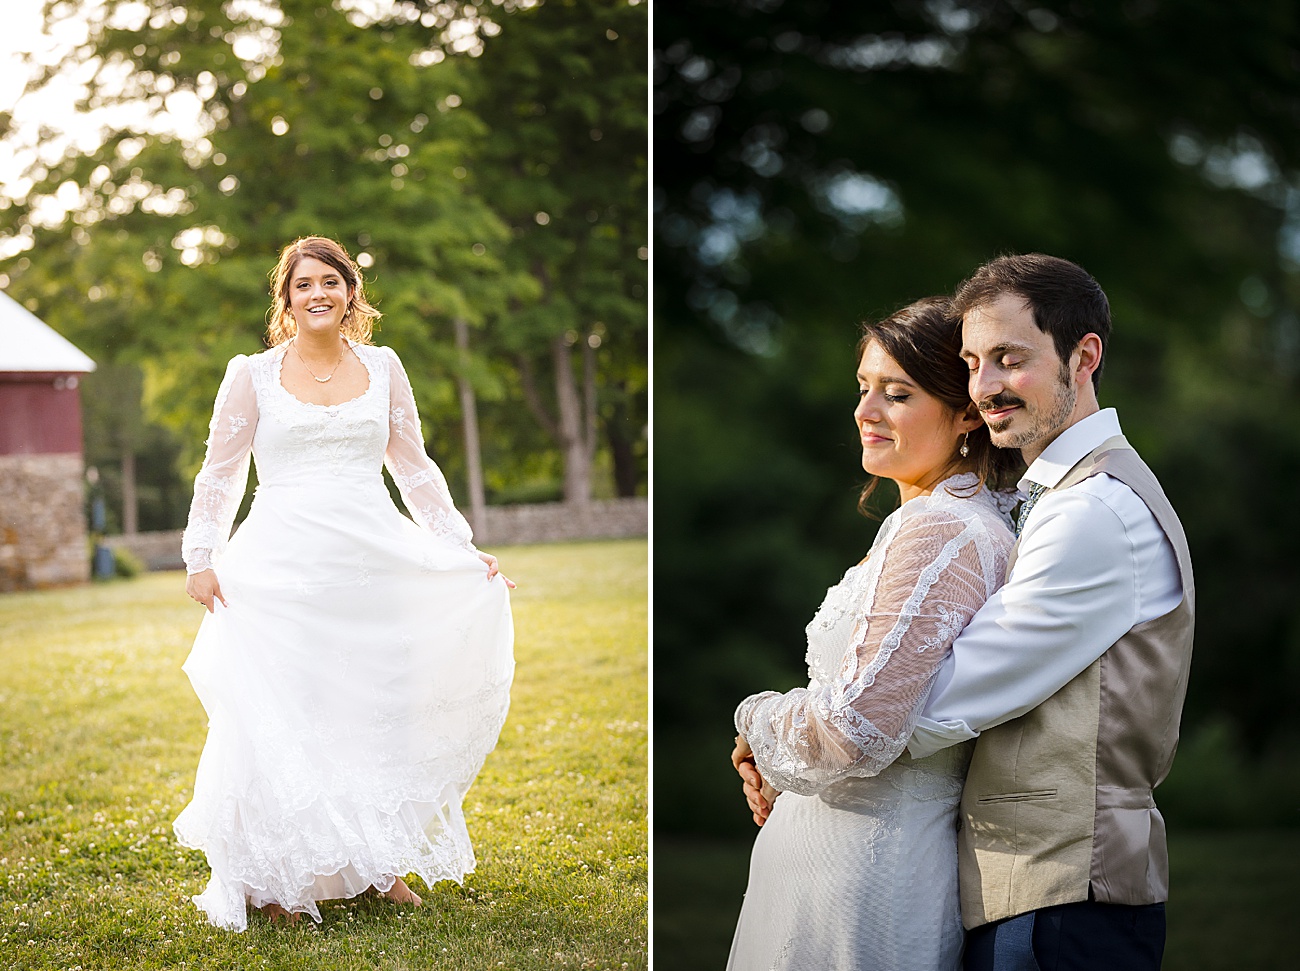 Bride and groom in light at Parmelee Farm Wedding in Killingworth CT by Jamerlyn Brown Photography